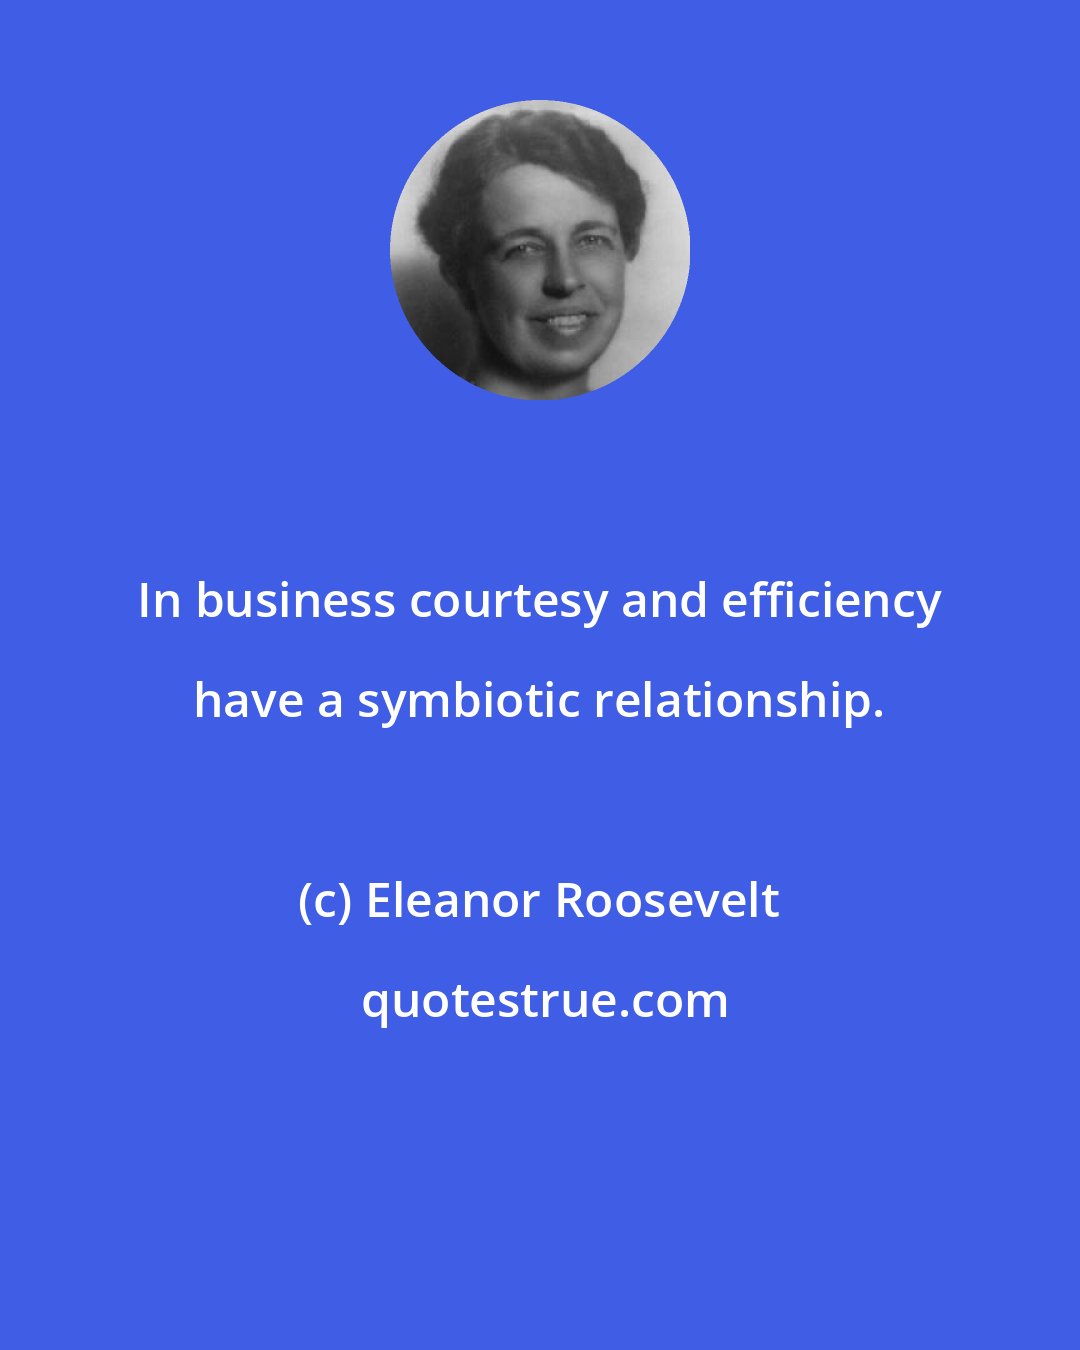 Eleanor Roosevelt: In business courtesy and efficiency have a symbiotic relationship.